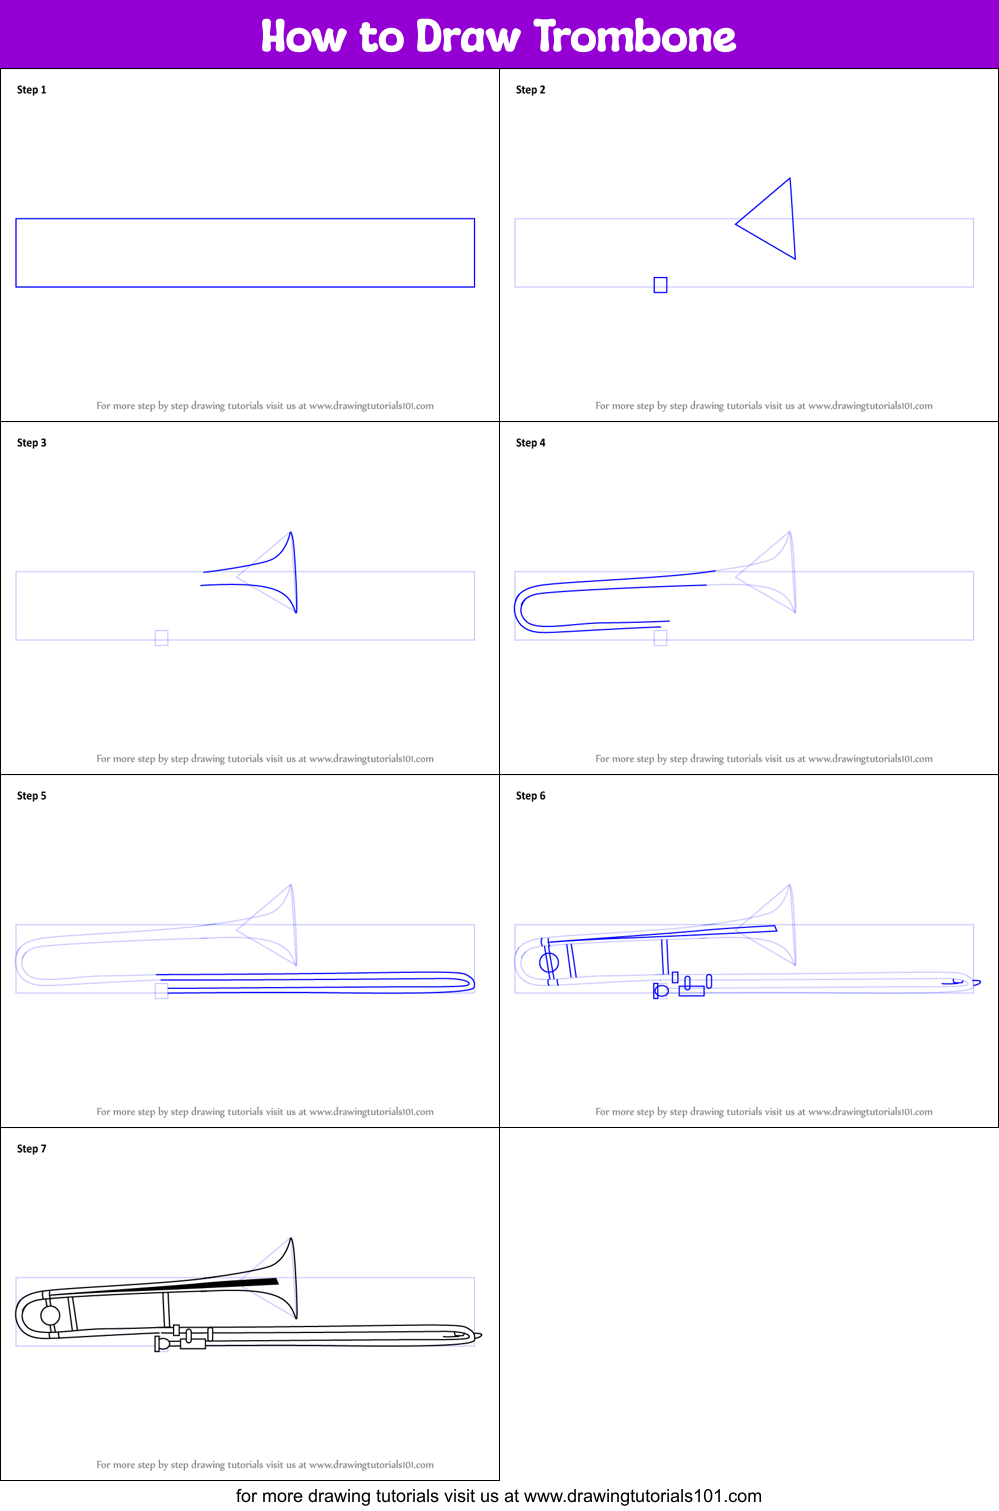 How to Draw Trombone printable step by step drawing sheet